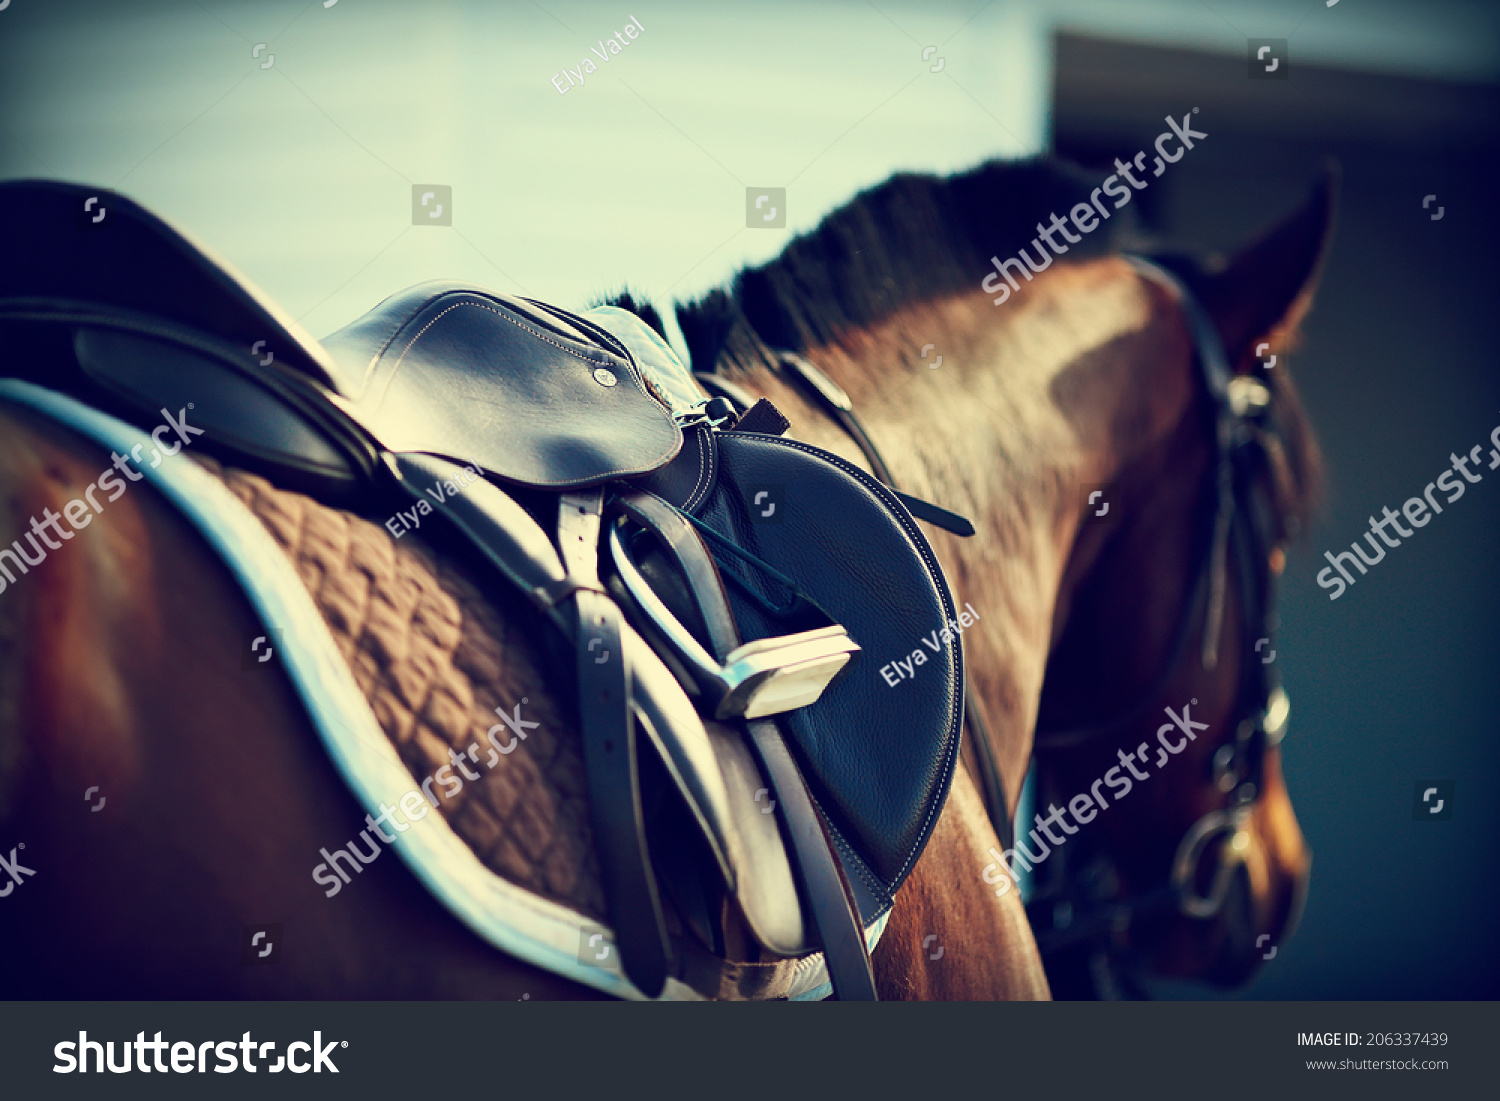 Saddle with stirrups on a back of a horse #206337439